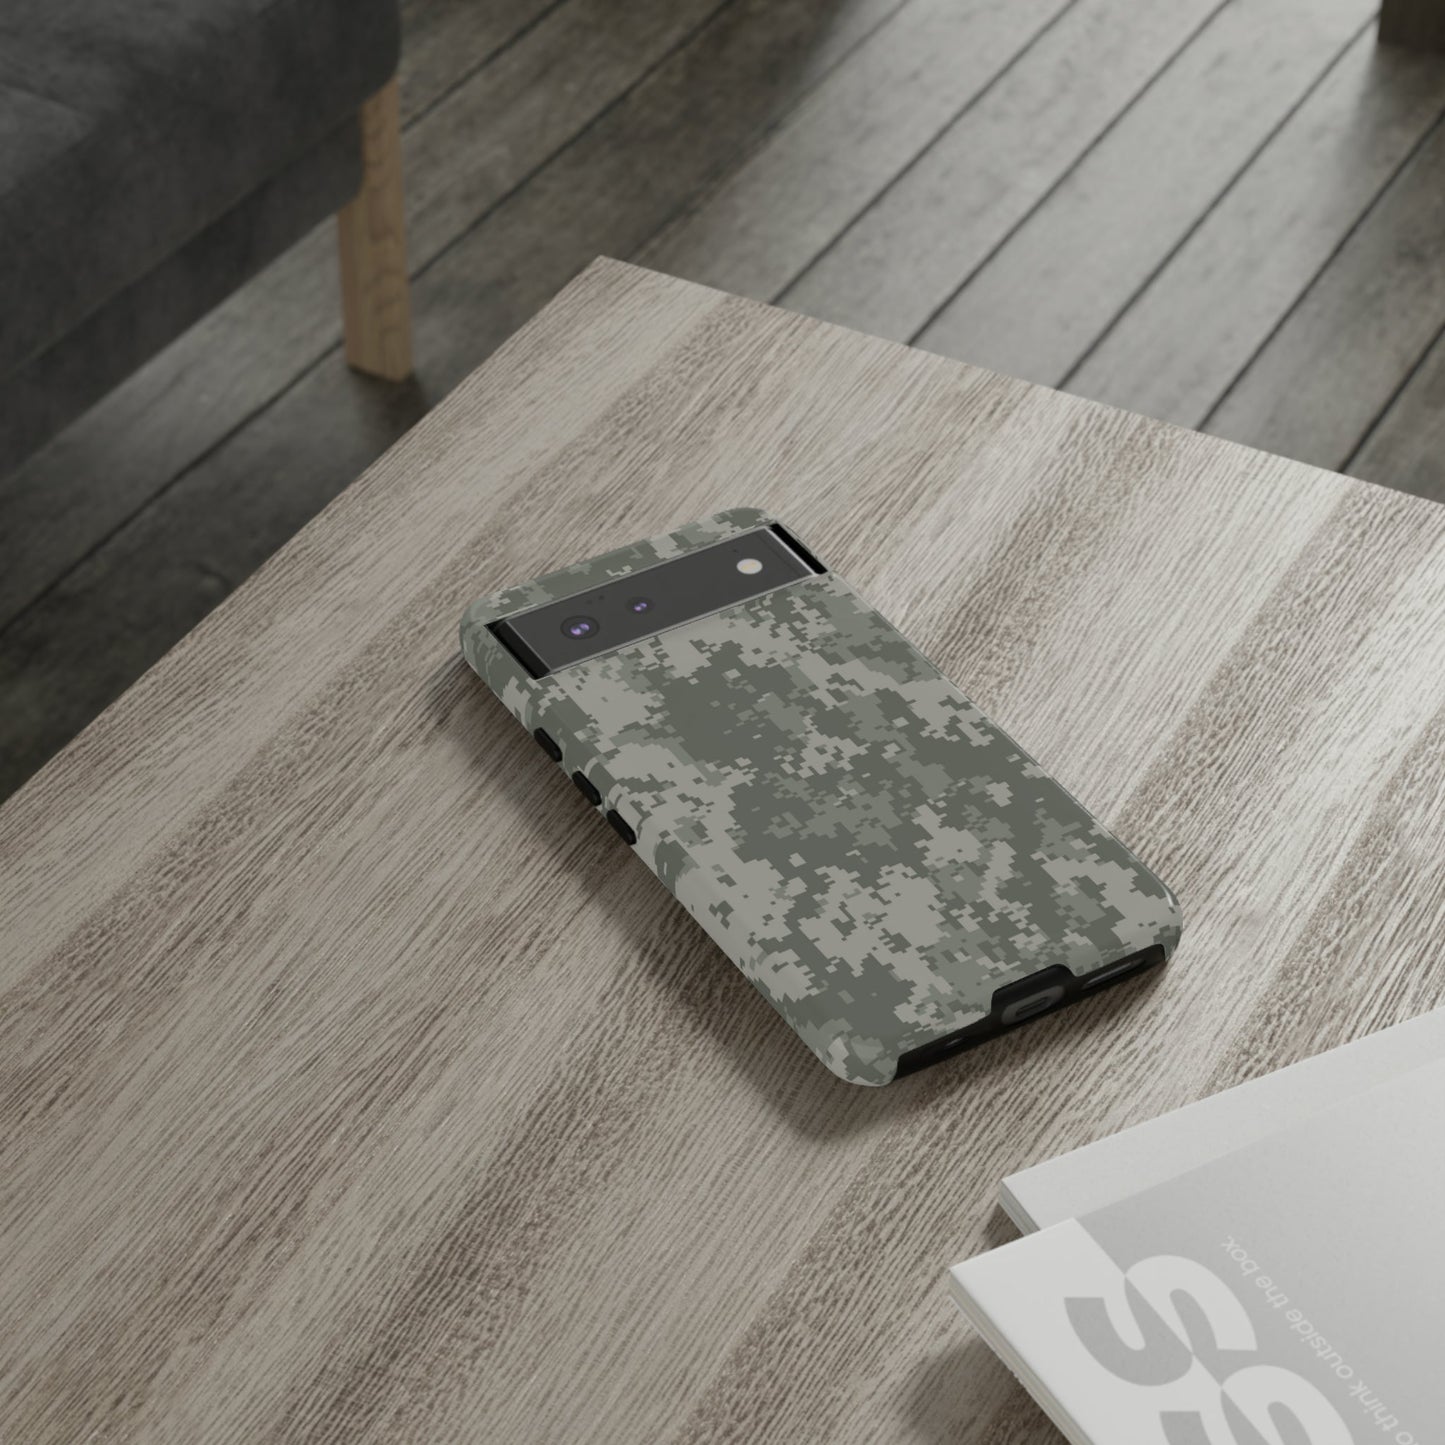 Military Style Tough Cases for iPhone, Samsung, Google-Shalav5